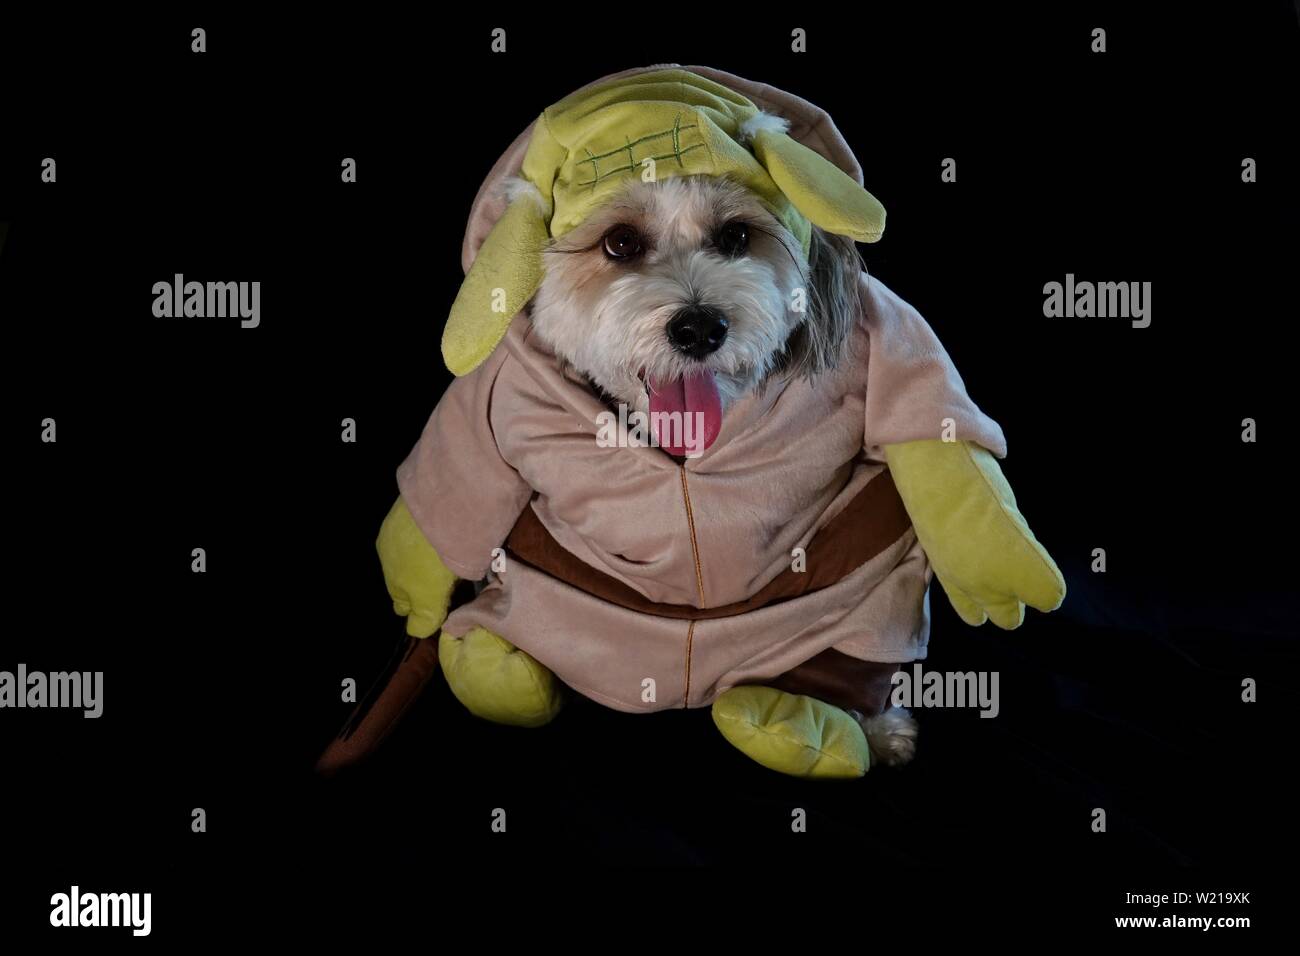 A dog is dressed up as Yoda from the movie Star Wars for Halloween. Stock Photo